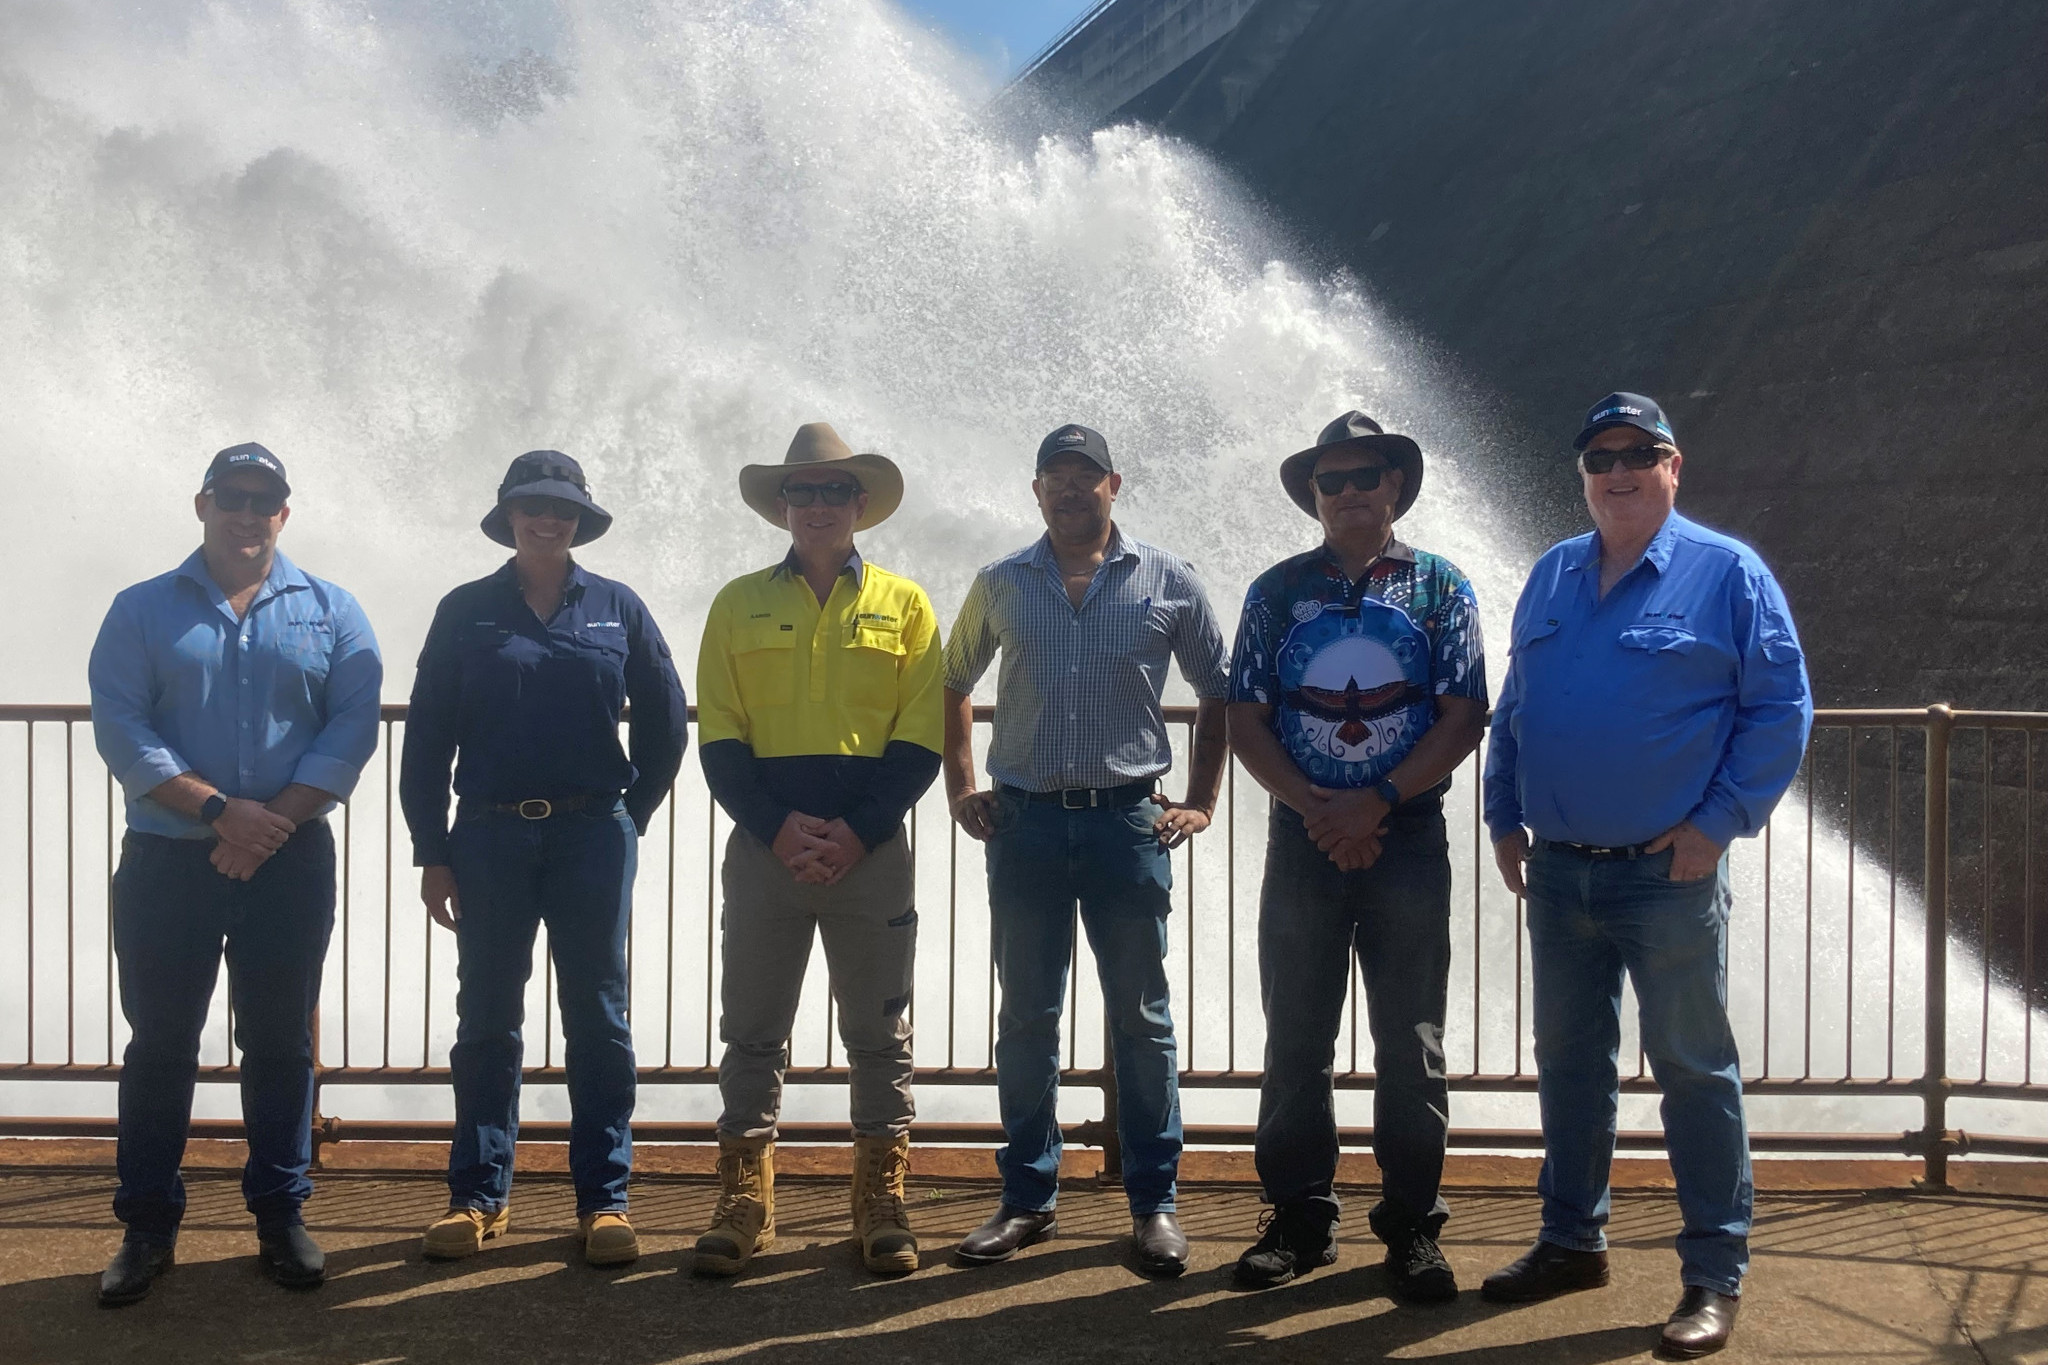 Andrew Cooper, Sunwater operations manager for the Far North Andrew (far left) with some members of the Sunwater team in front of Tinaroo Falls dam.